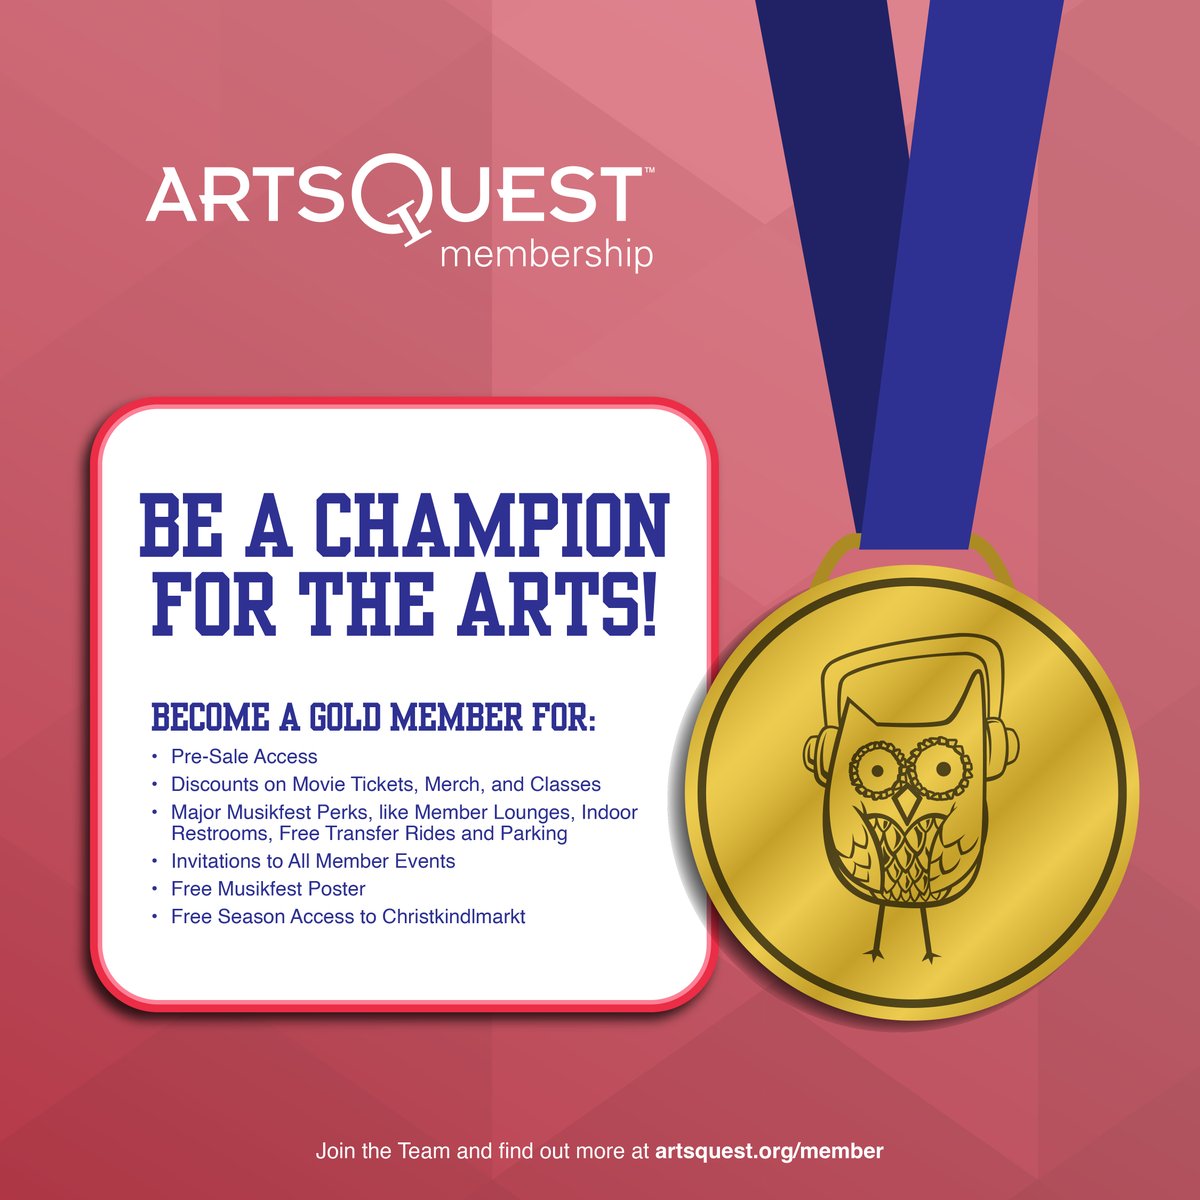 Be a champion for the arts! 🥇 It's time to Go for Gold and become an ArtsQuest Member today! Don't miss out on the amazing benefits that await you. 👉brnw.ch/21wJGWN